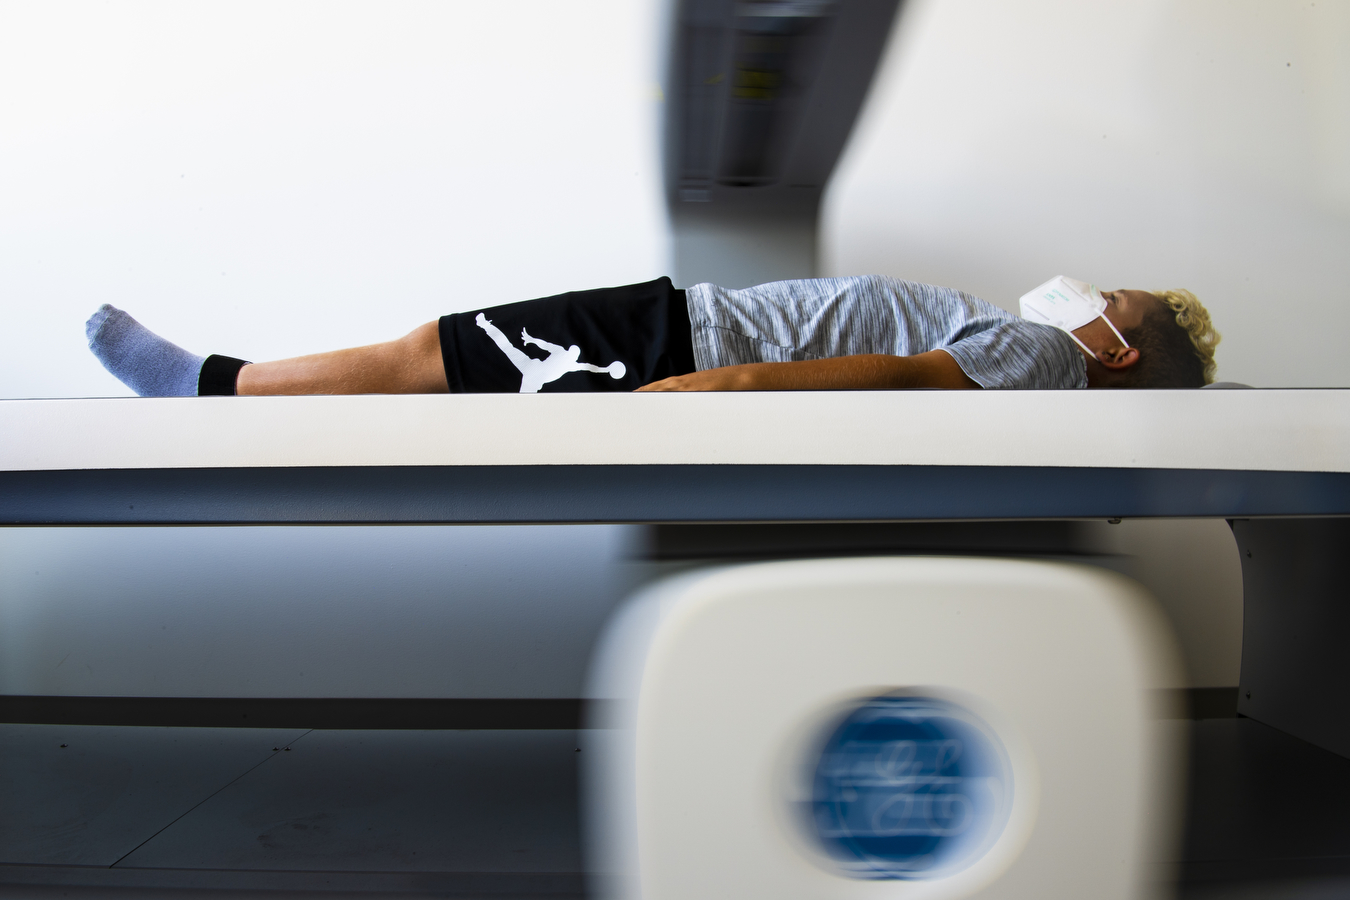 A study participant lays on a flat surface under a x-ray maching